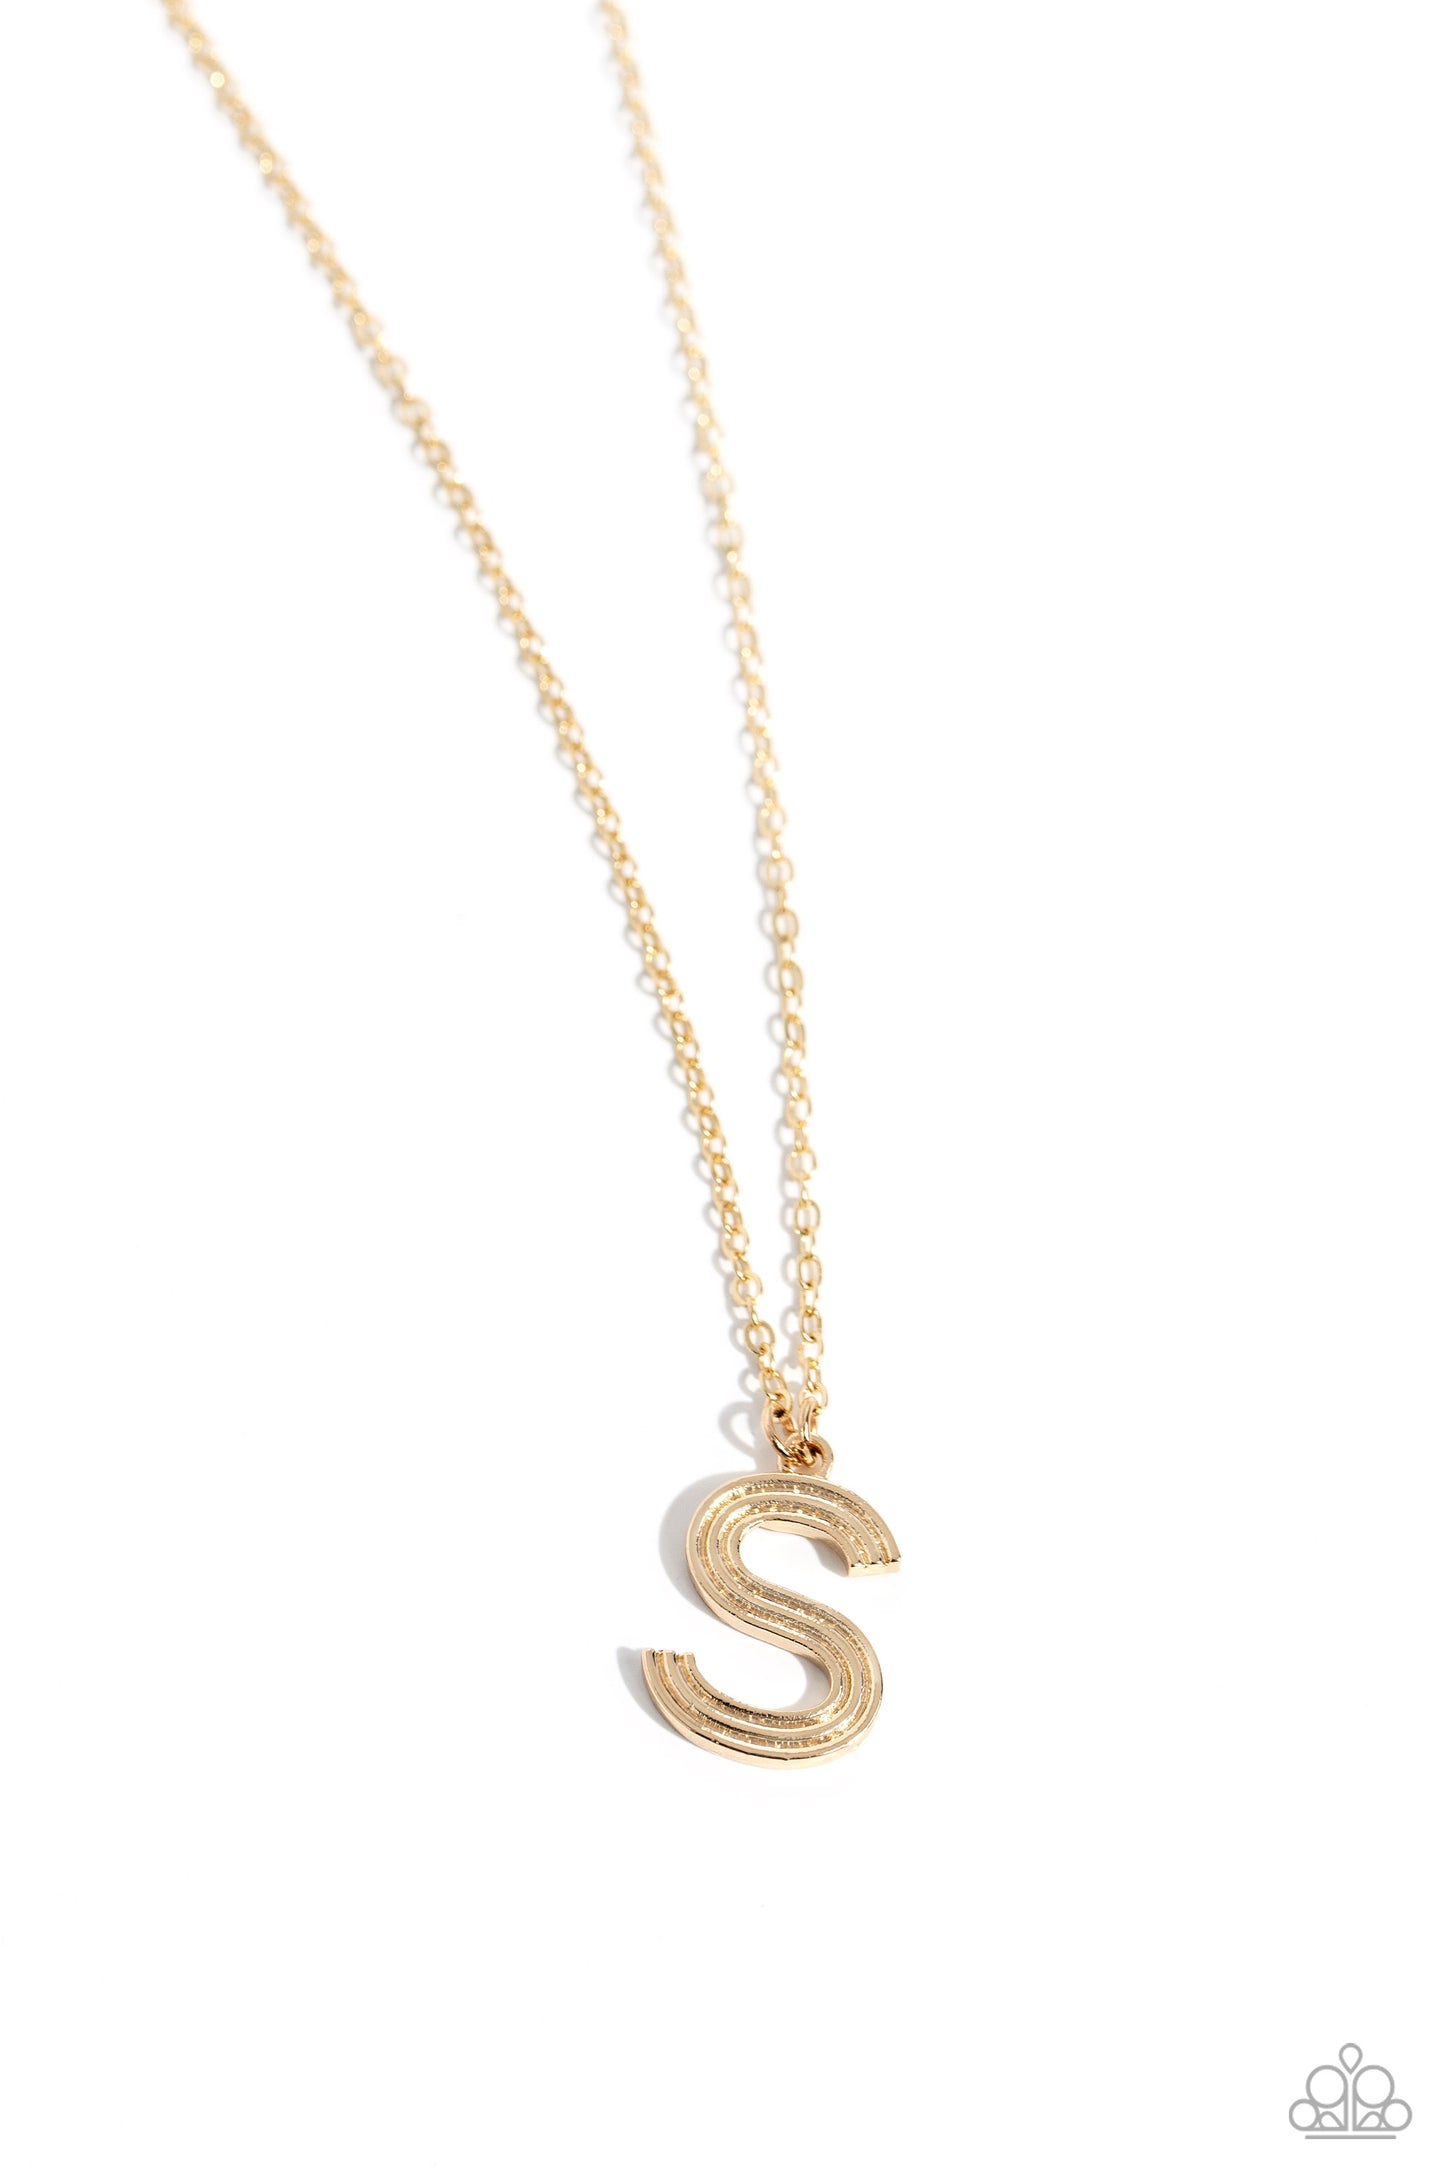 Leave Your Initials - gold - S - Paparazzi necklace